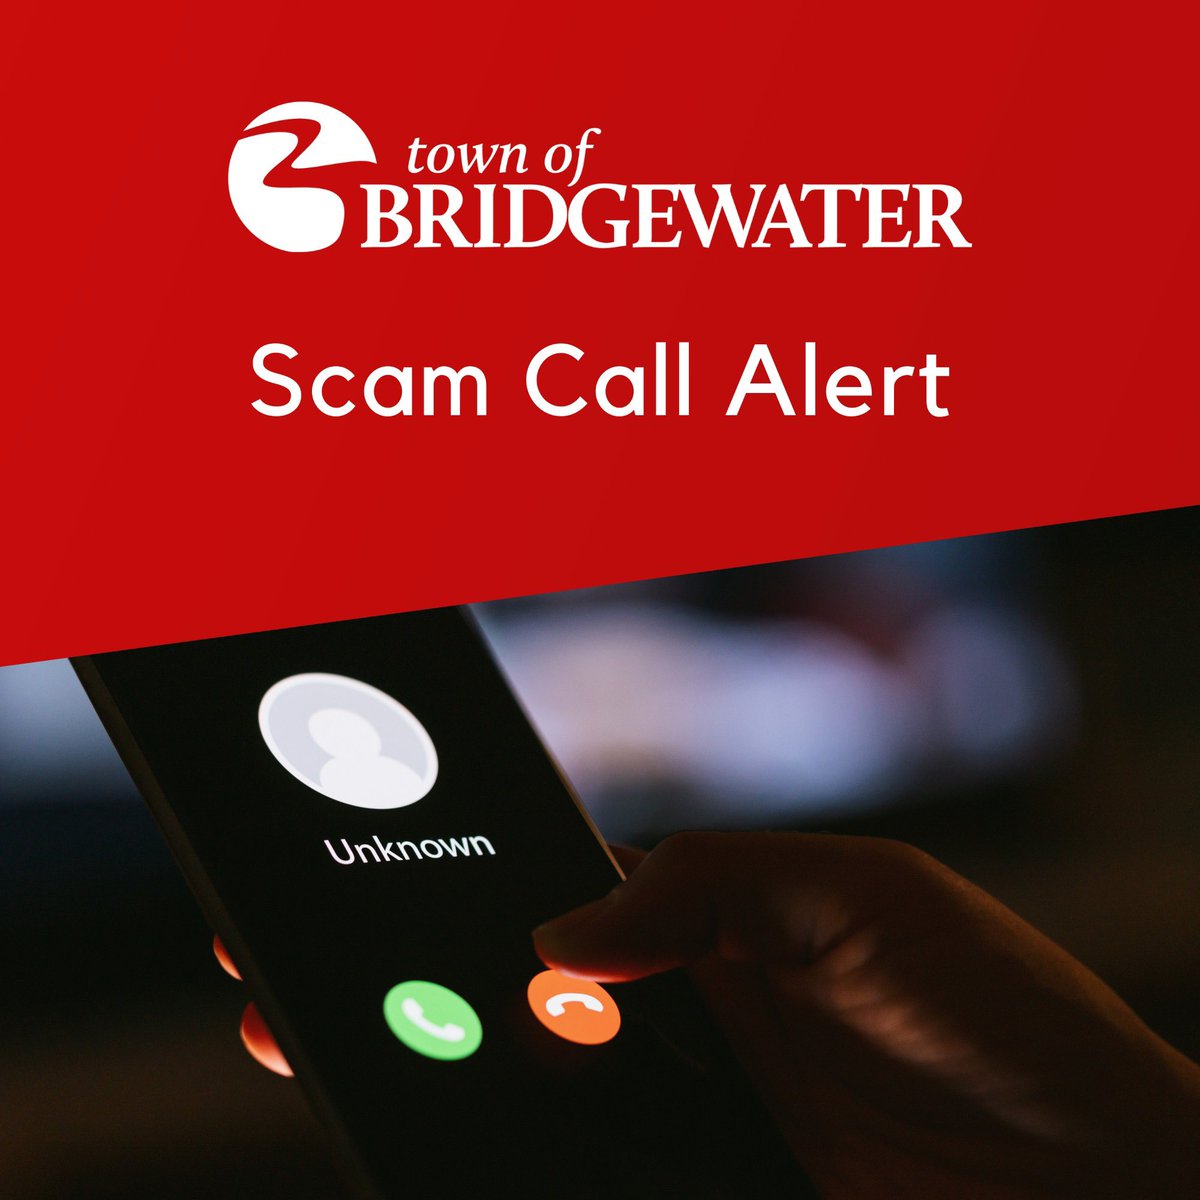 📣 We’ve been advised there is a scam call making the rounds purporting to be a police survey and prompting call recipients to “Press 1” to get an online link to the survey. Neither the Town of Bridgewater nor @policenews are conducting any such survey.